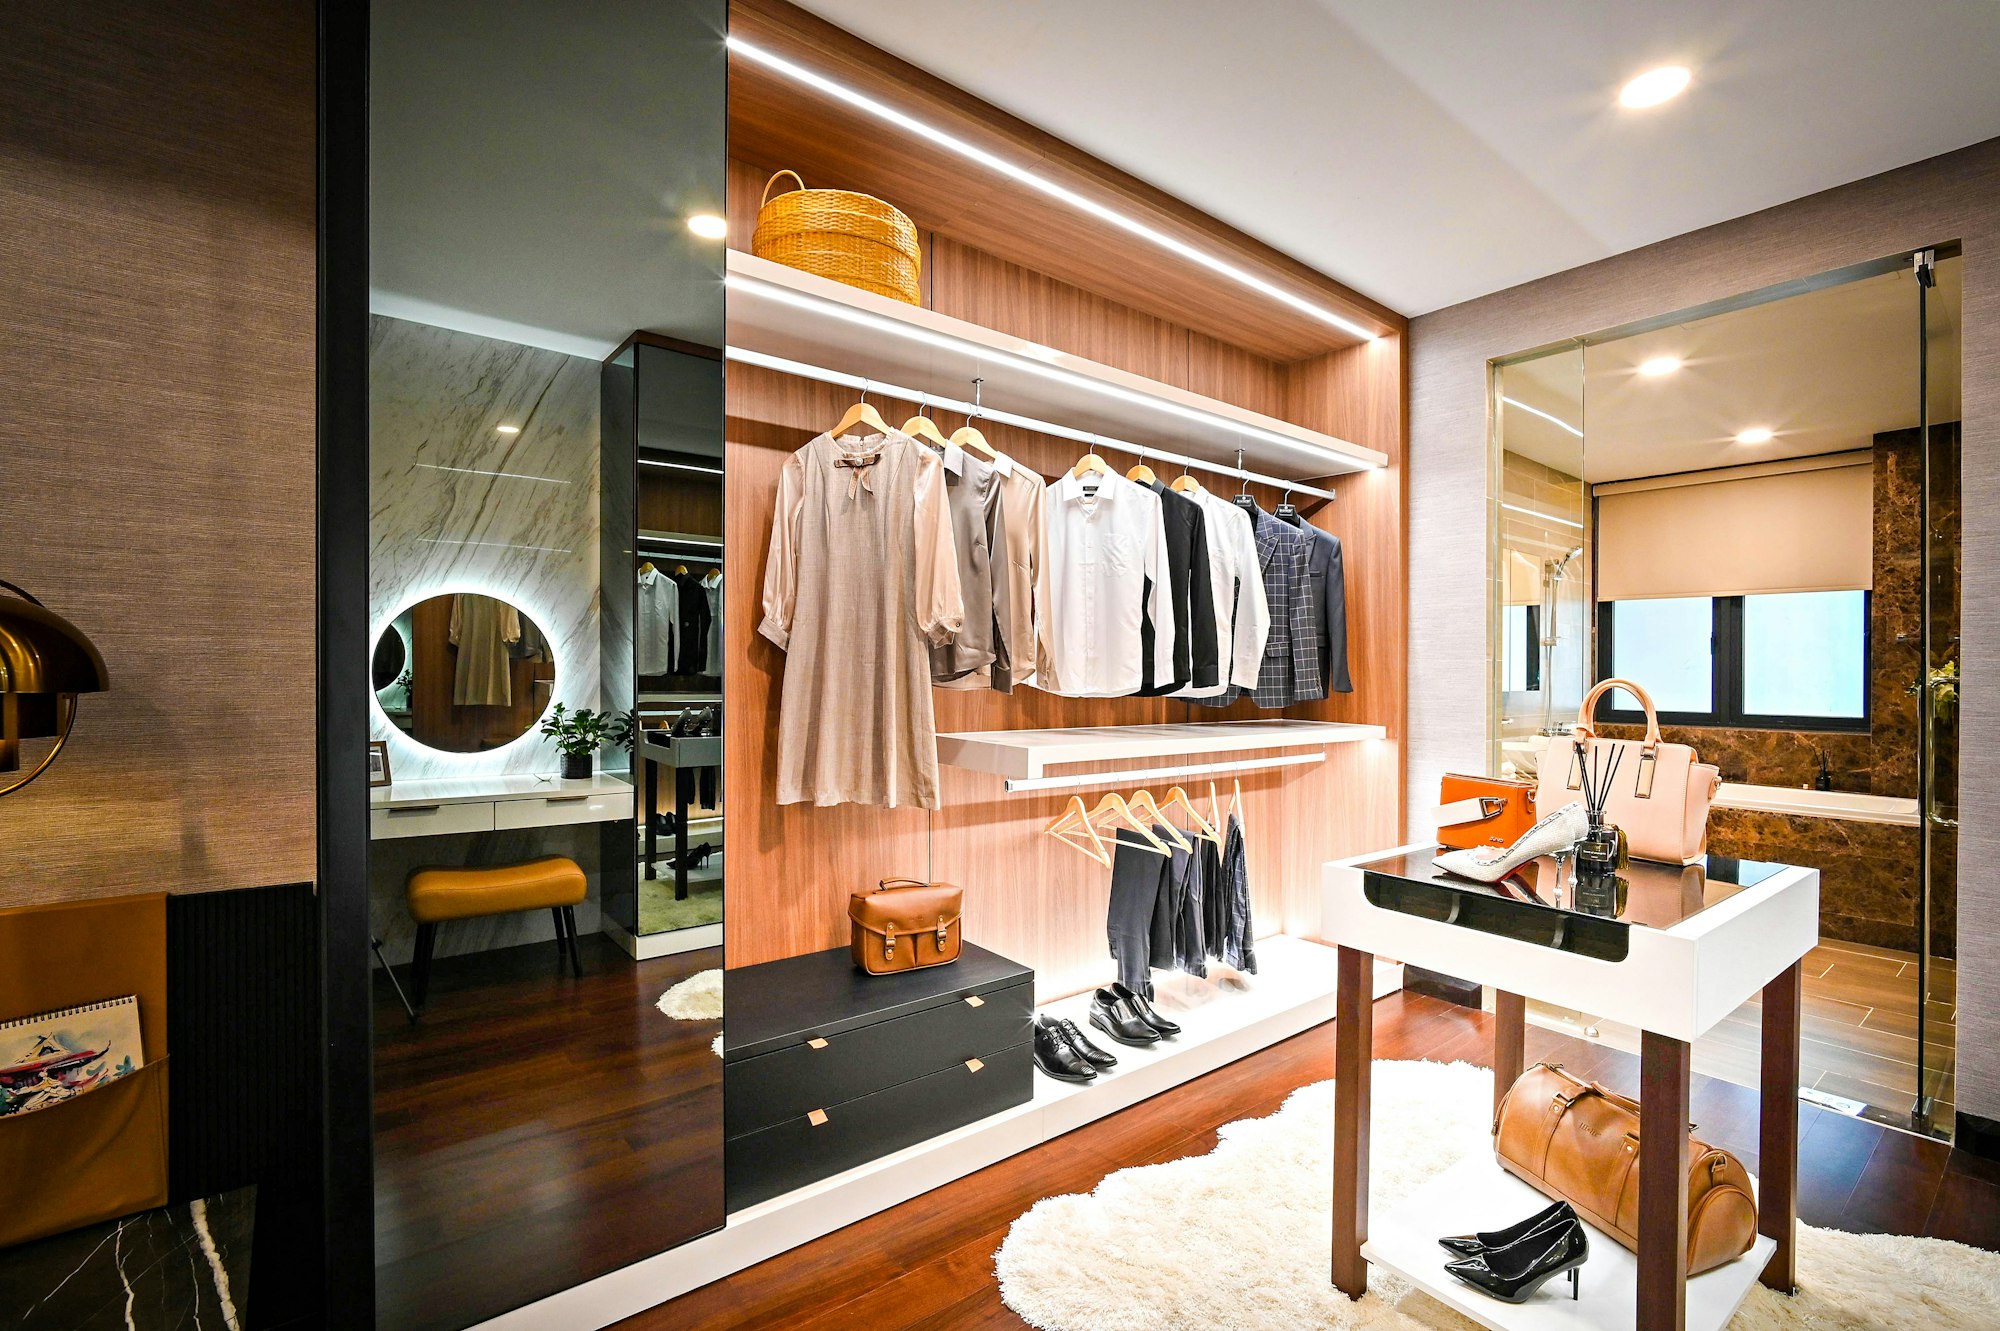 Designing Your Dream Closet: What to Consider